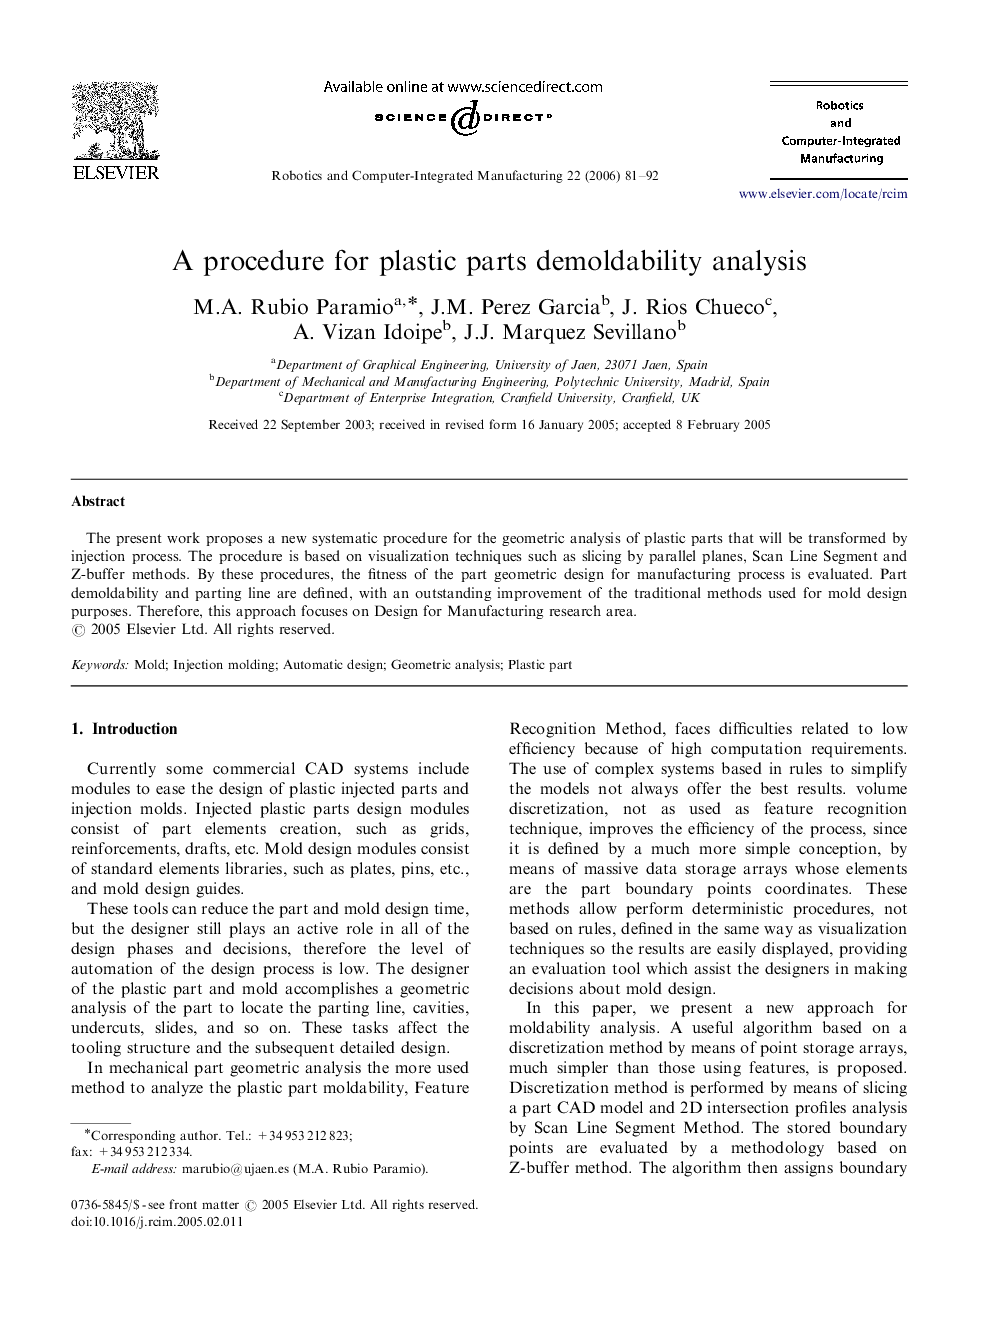 A procedure for plastic parts demoldability analysis